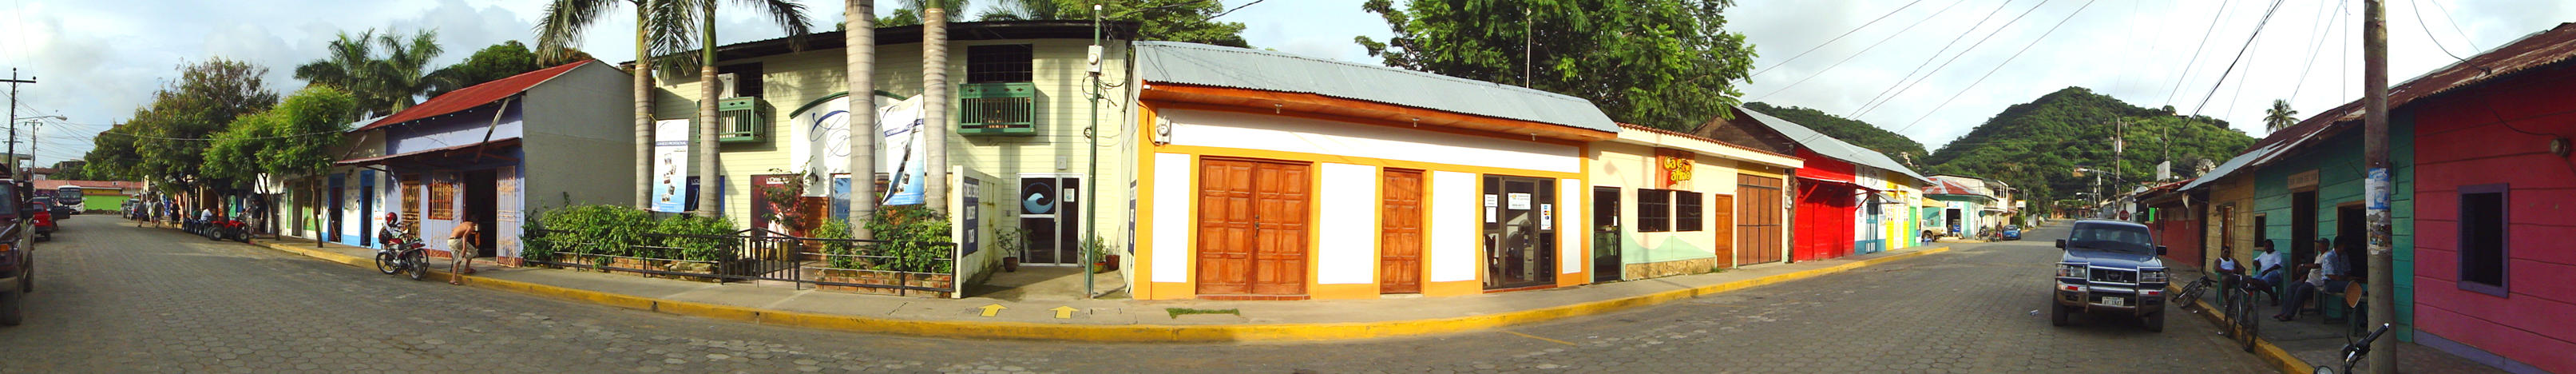 The street with Azul Beauty & Spa and Buena Vida Fitness Center in San Juan del Sur, Nicaragua